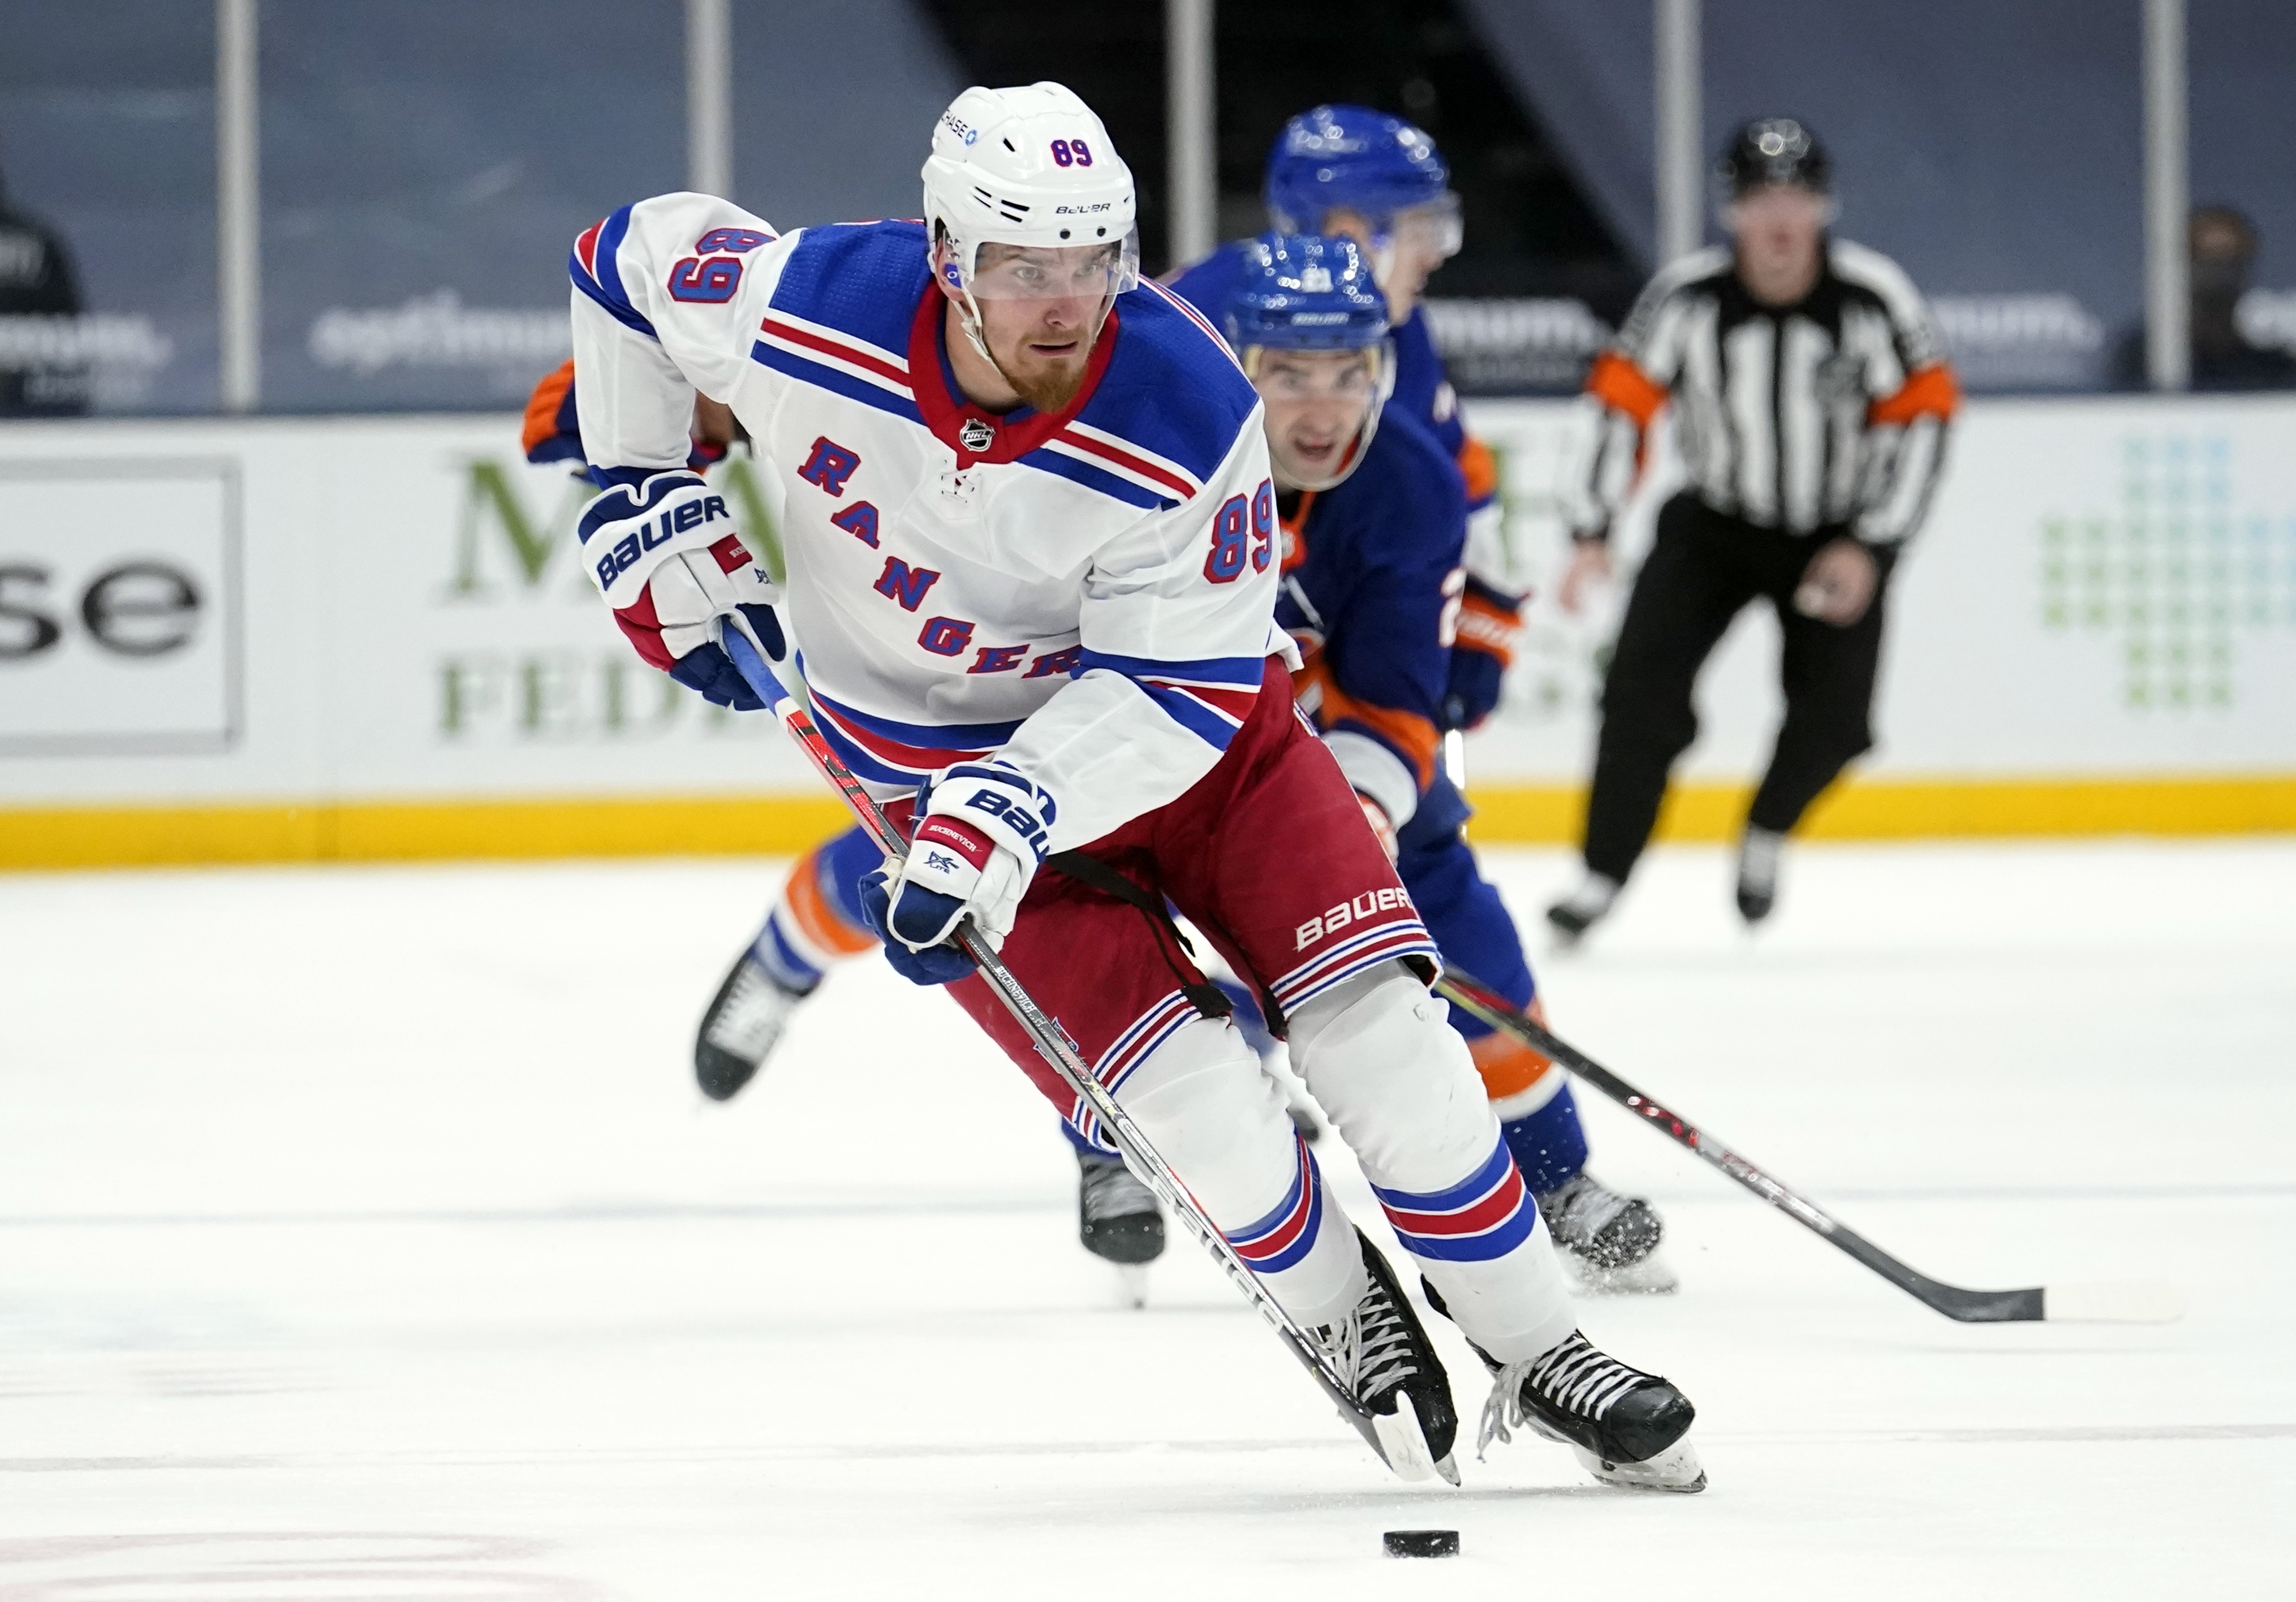 Rangers' Pavel Buchnevich Has Come a Long Way Since Rookie Season